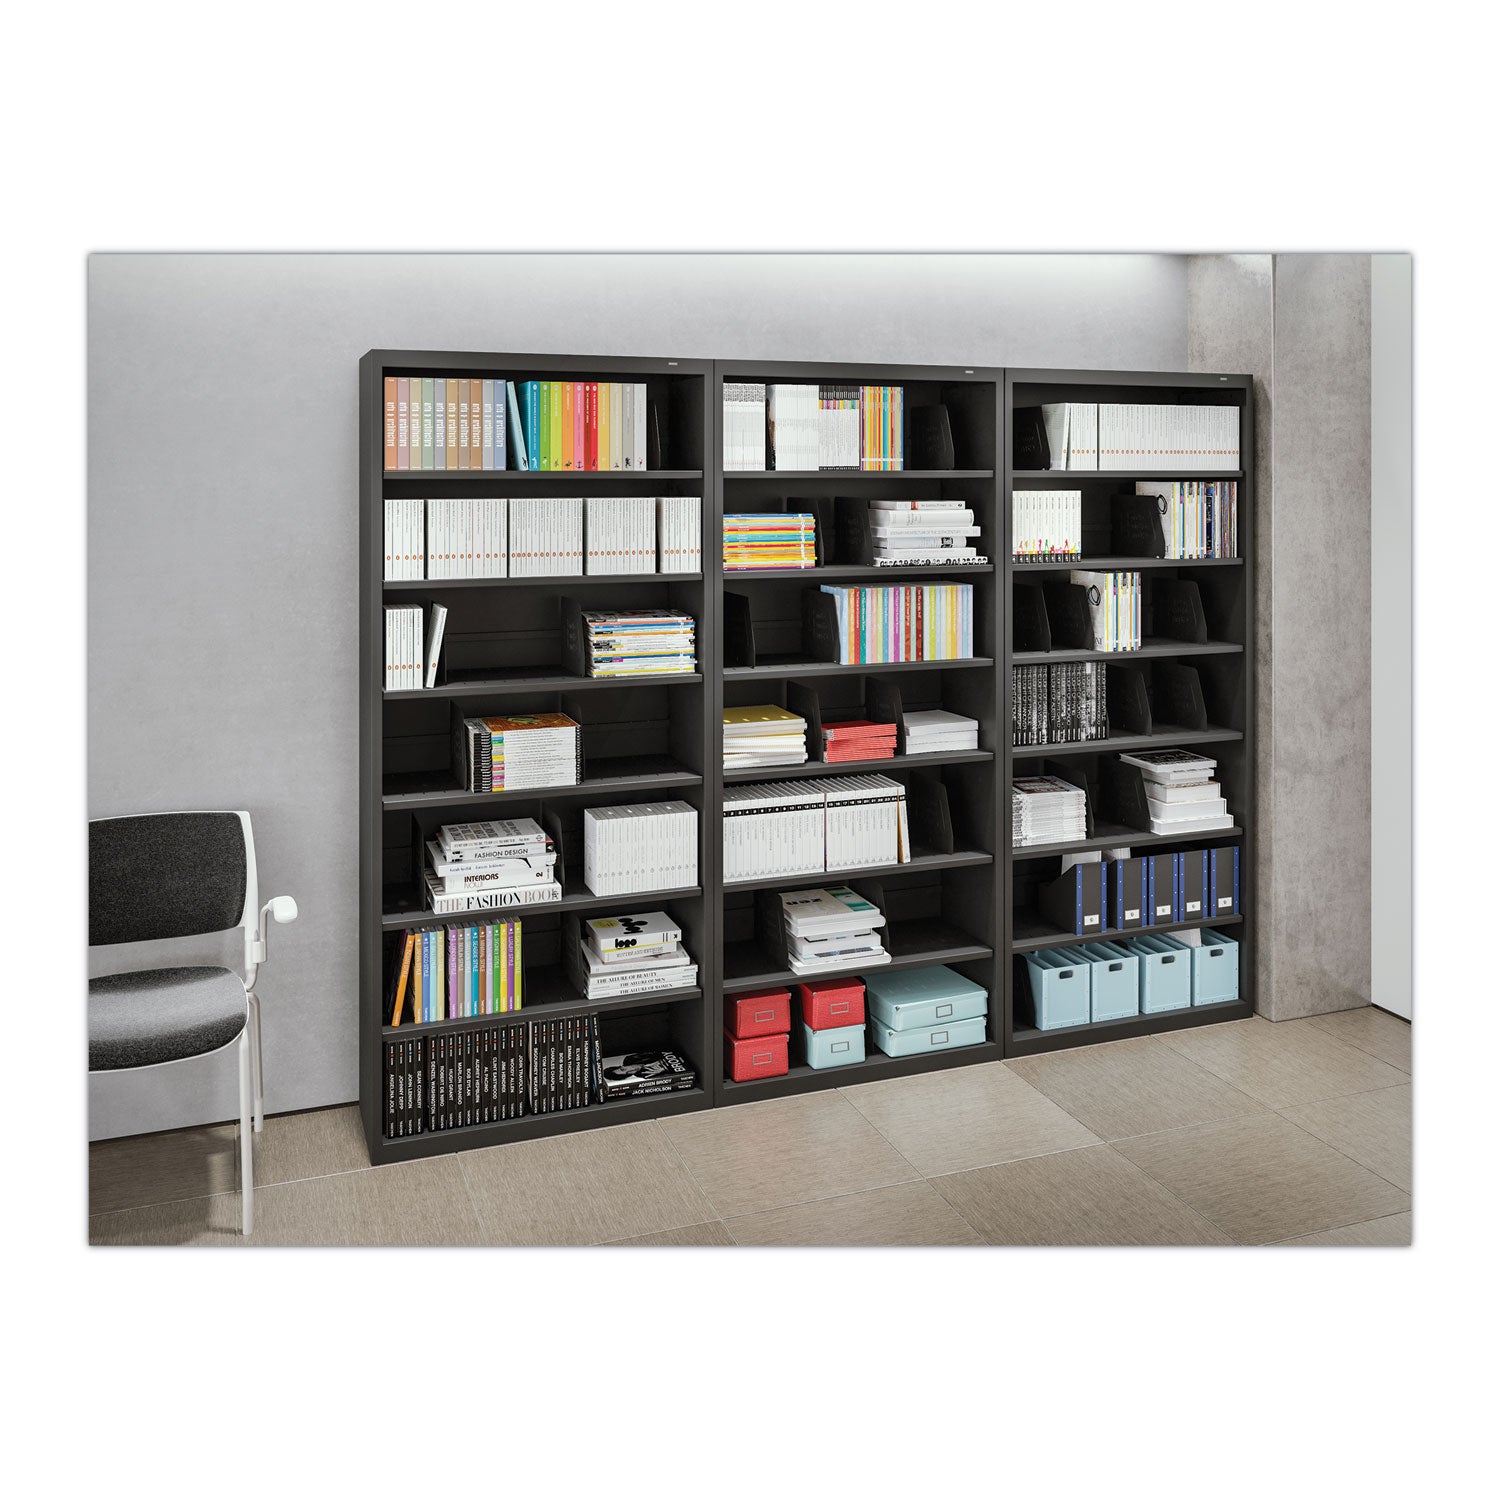 fixed-shelf-open-format-lateral-file-for-end-tab-folders-6-legal-letter-file-shelves-light-gray-36-x-165-x-7525_tnnfs360lgy - 2